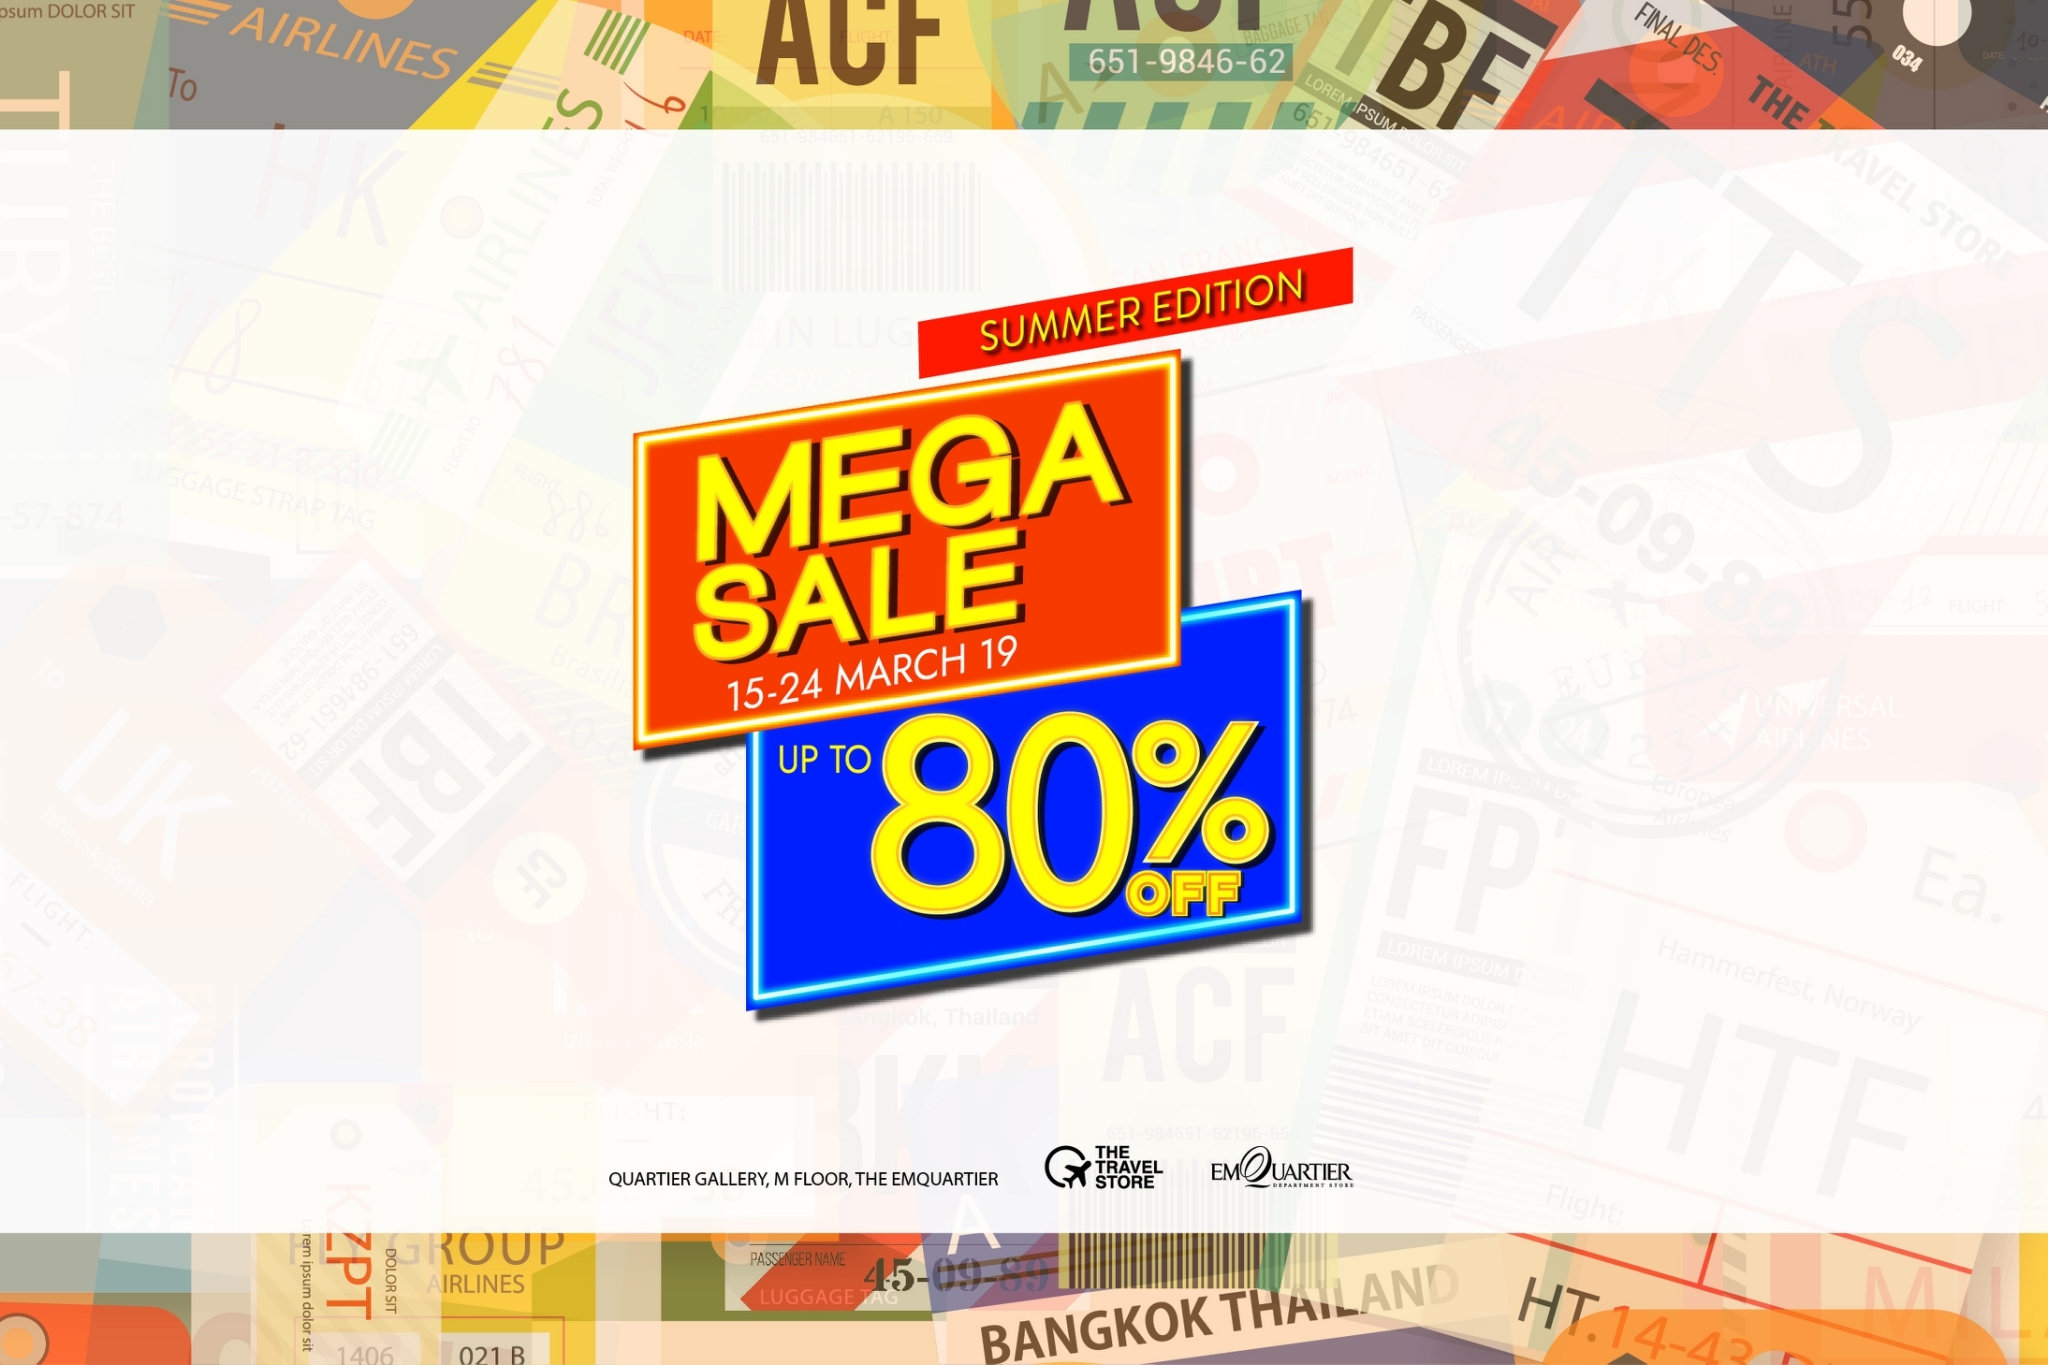 The Travel Store Mega Sale – Summer Edition